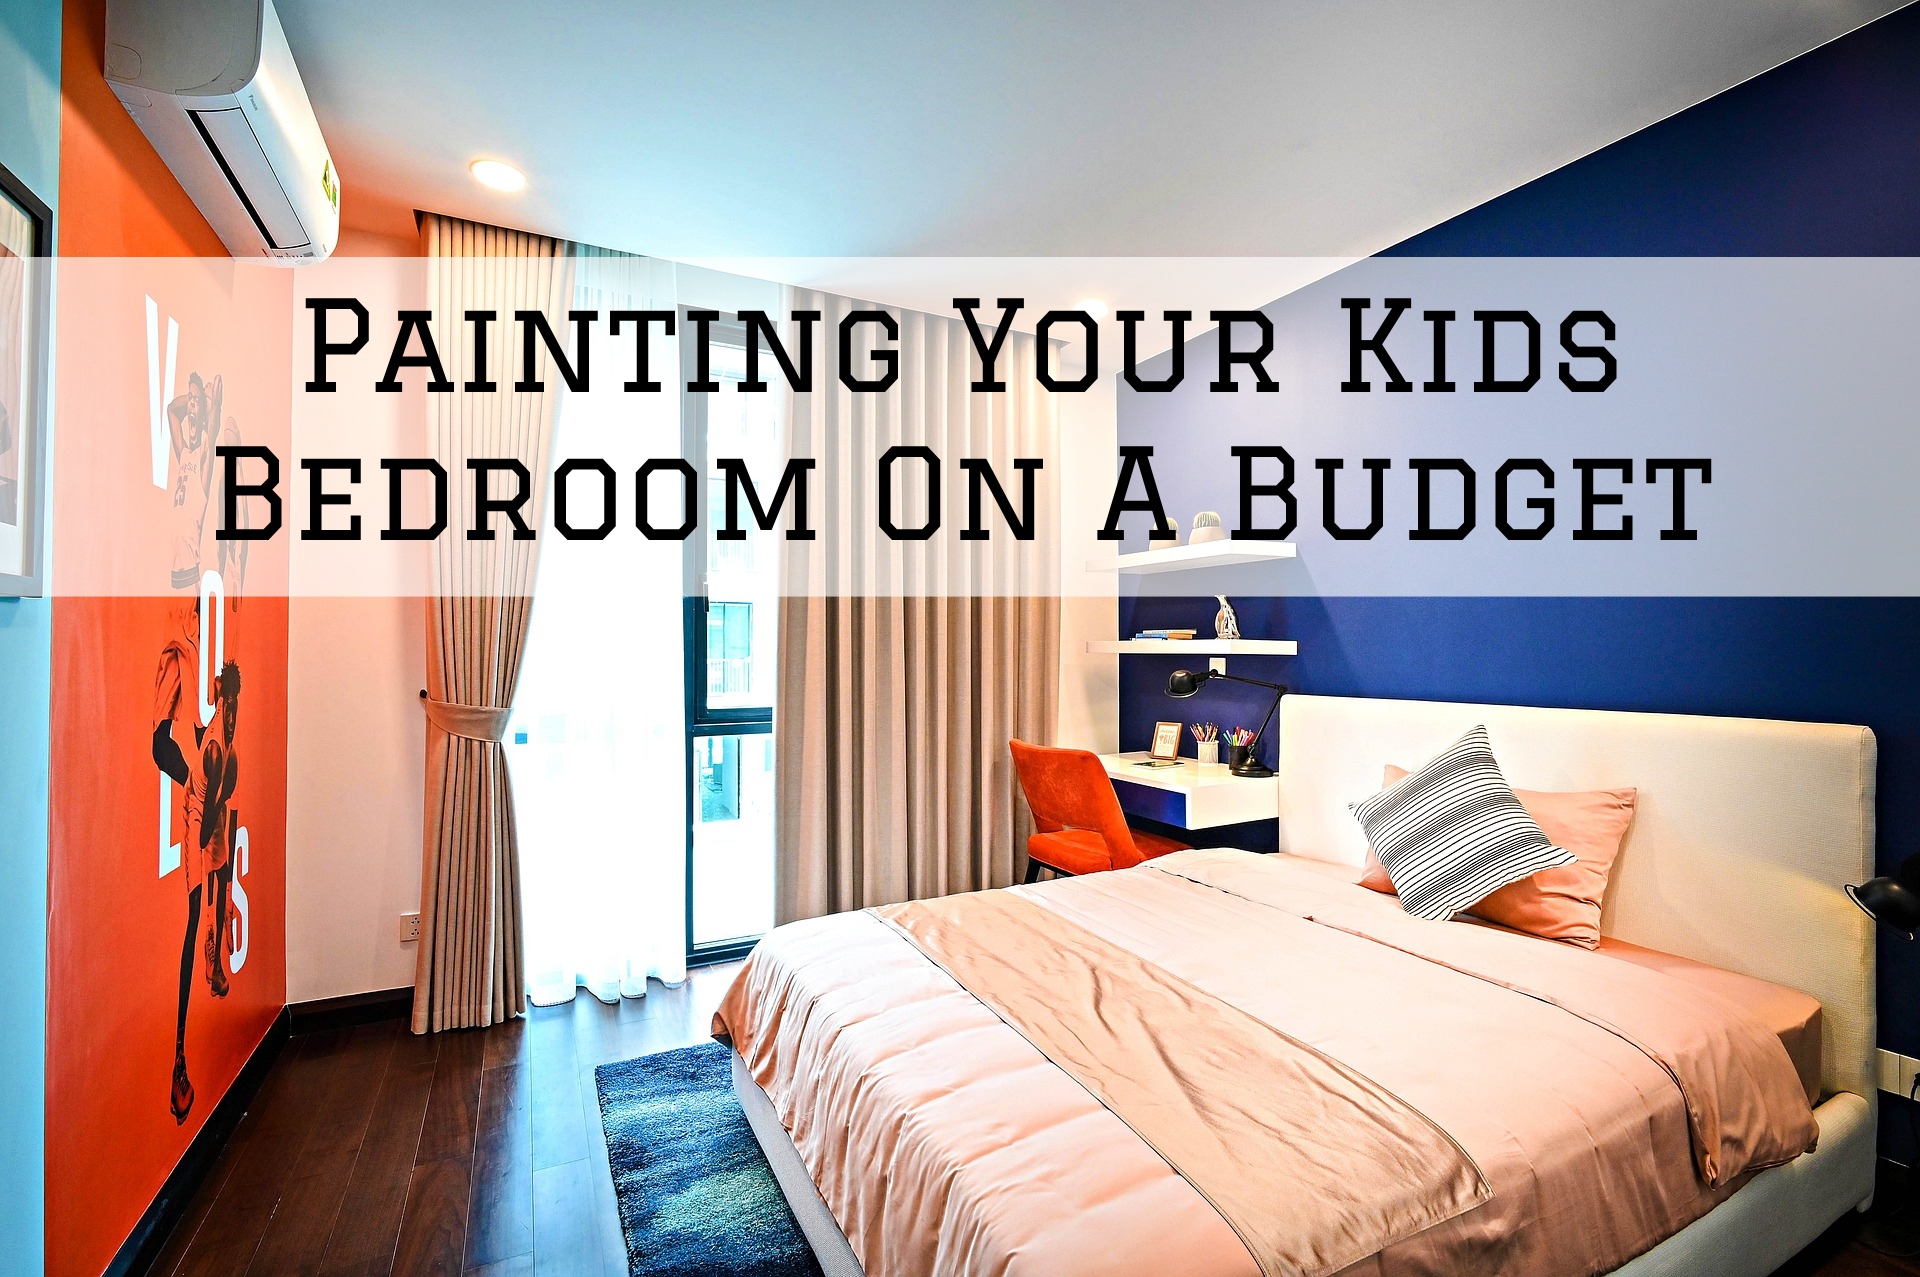 2022-04-01 Left Moon Painting Kennett Square PA Kids Bedroom Budget Painting